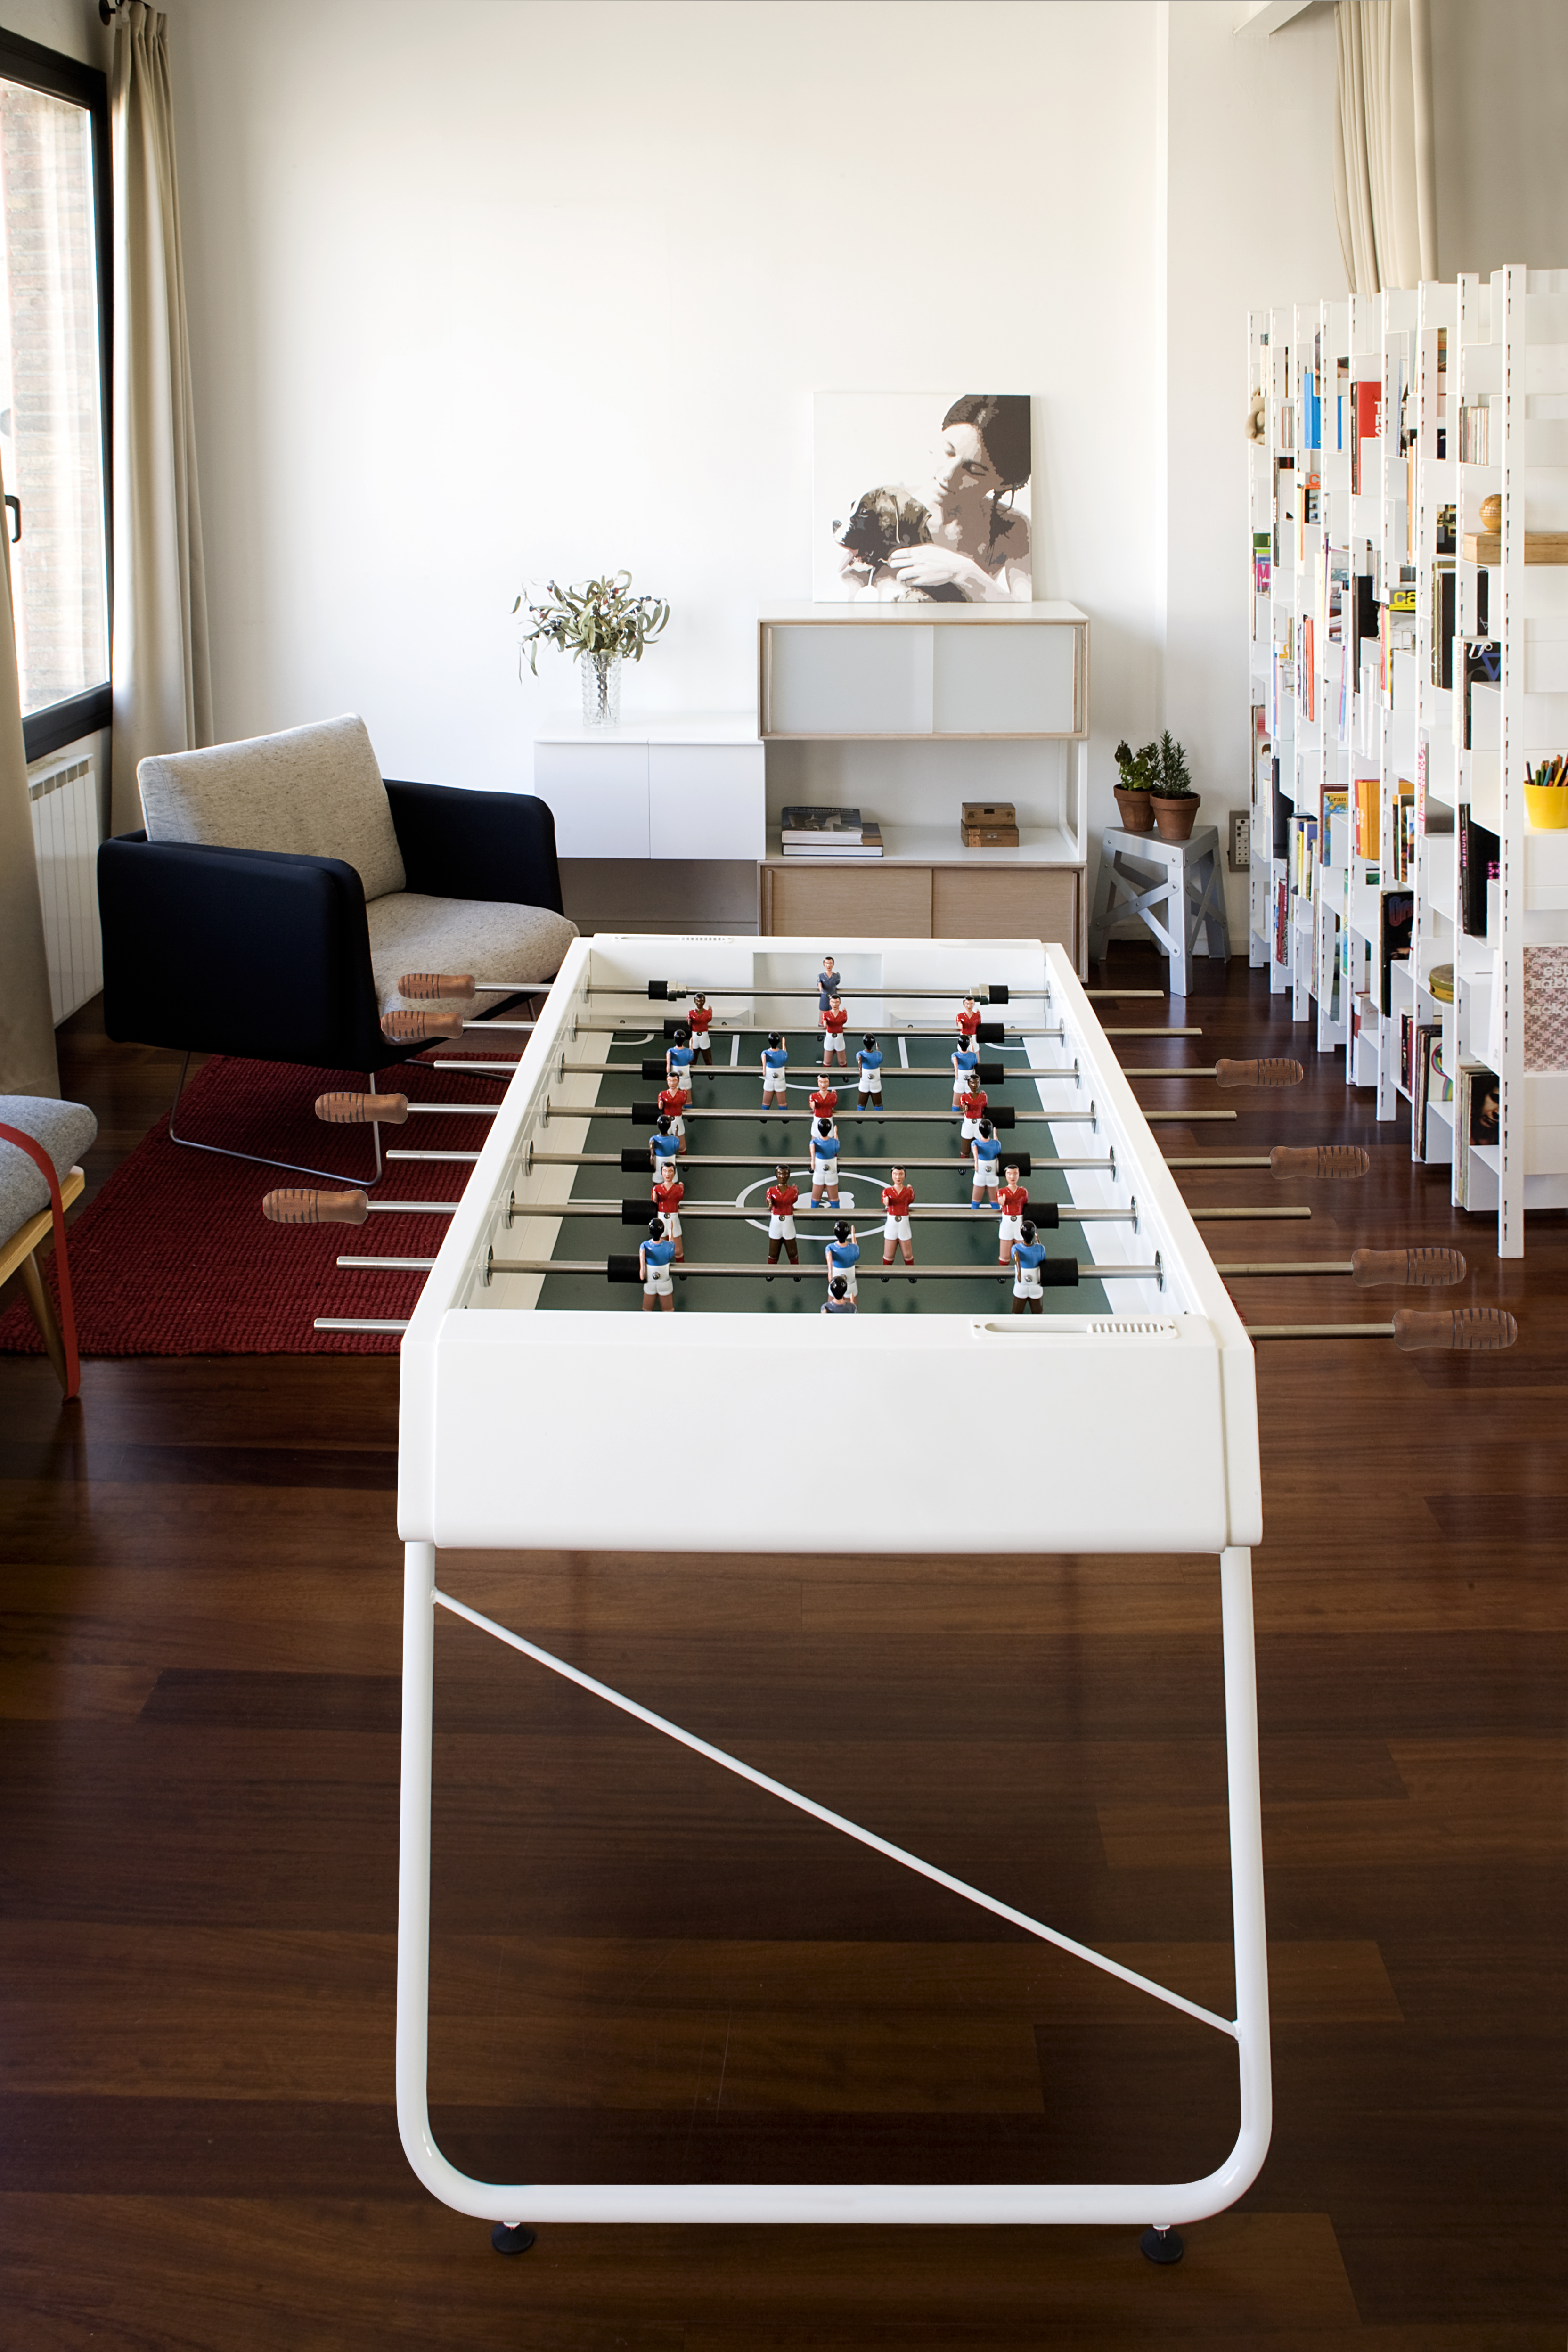 Football table "Flexible" - design RS#3 from RS Barcelona (in- & outdoor)